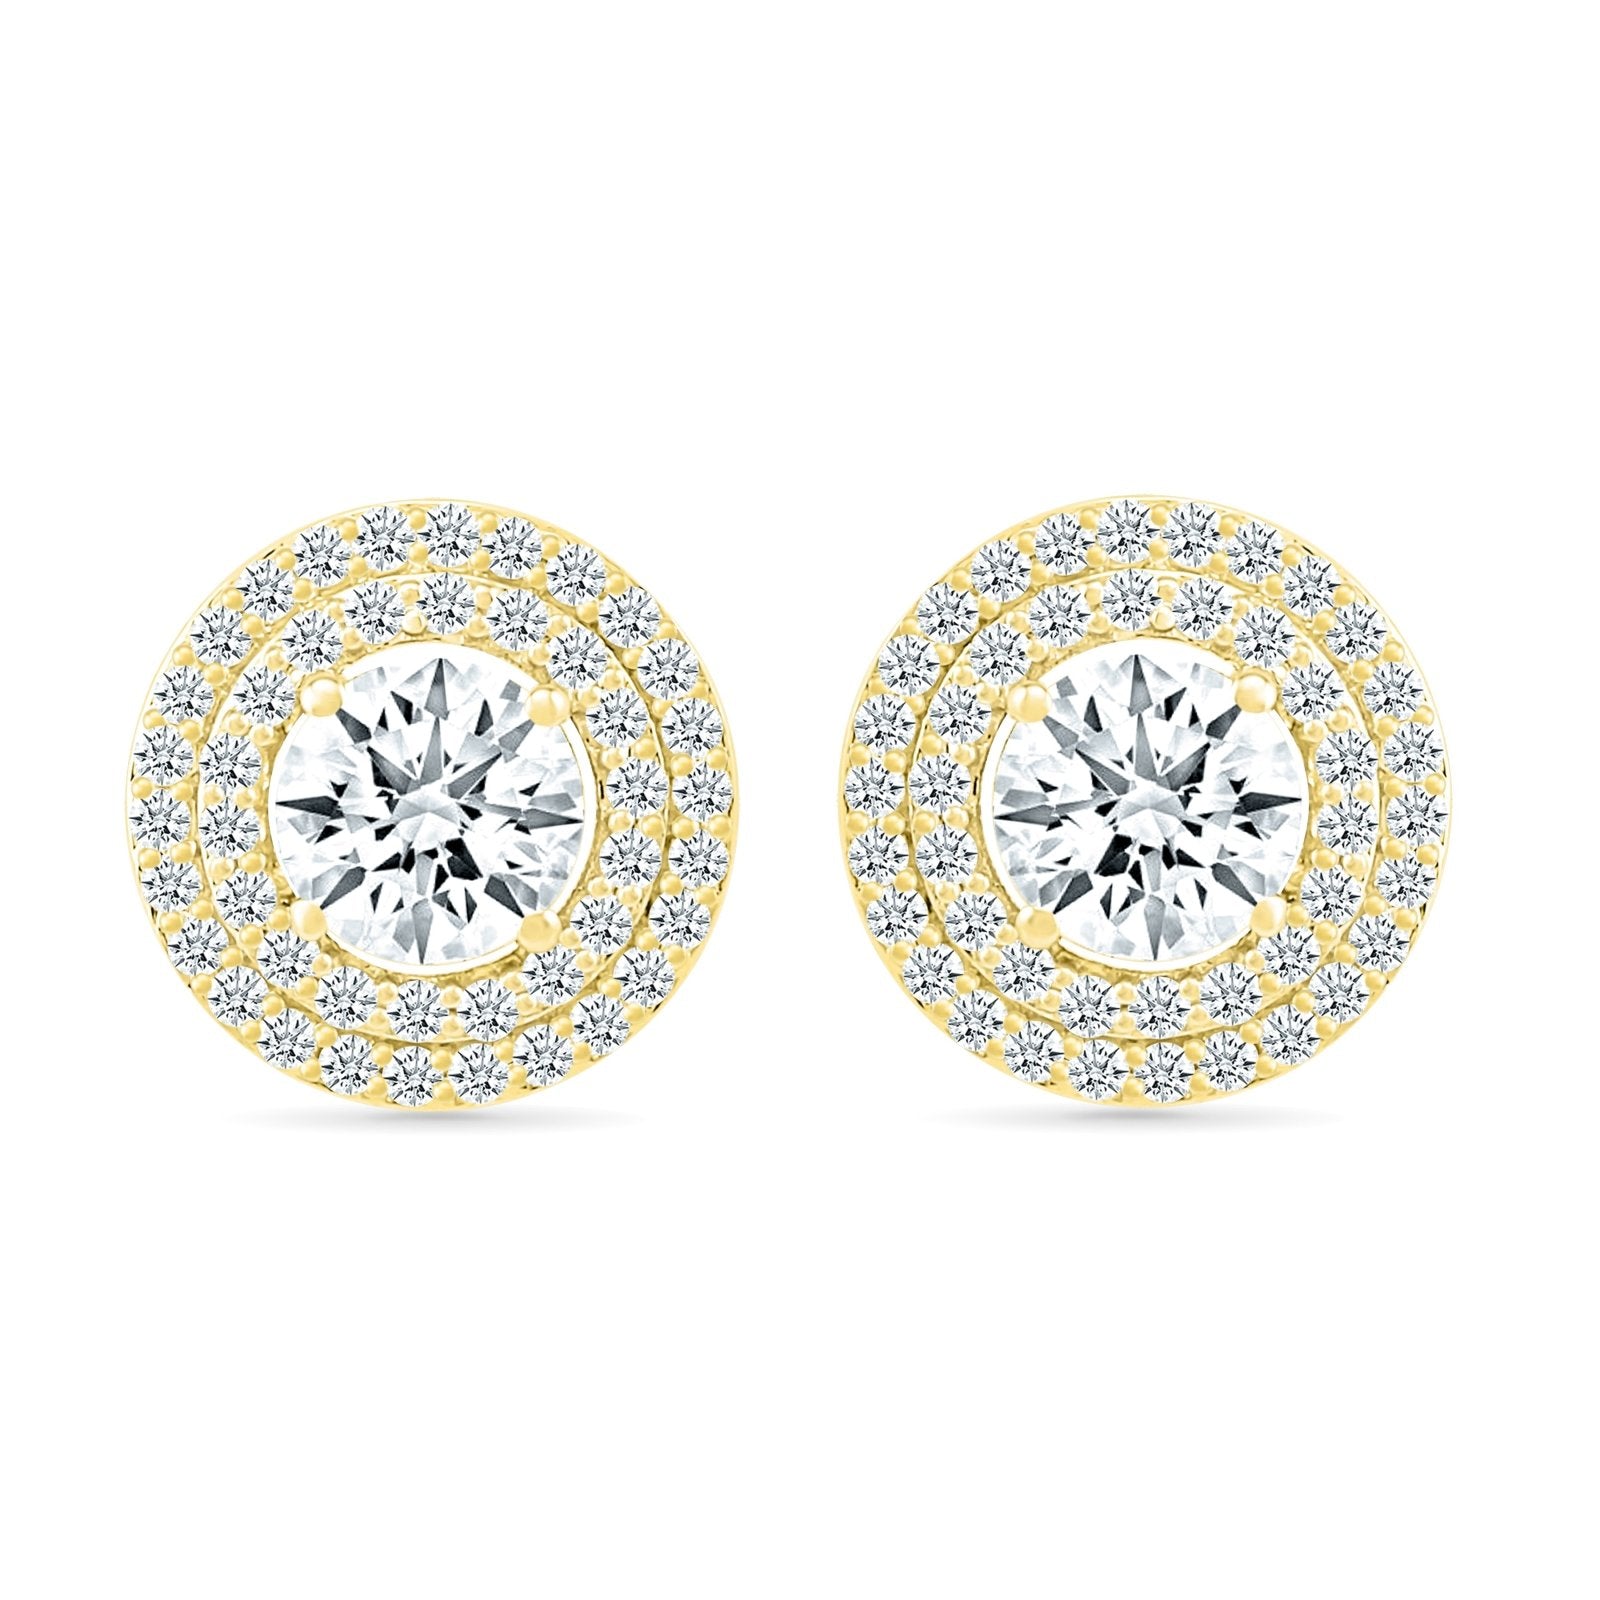 Round White Sapphire Studs with Double Halo Earrings Estella Collection 32655 Made to Order New Arrivals White Sapphire #tag4# #tag5# #tag6# #tag7# #tag8# #tag9# #tag10#